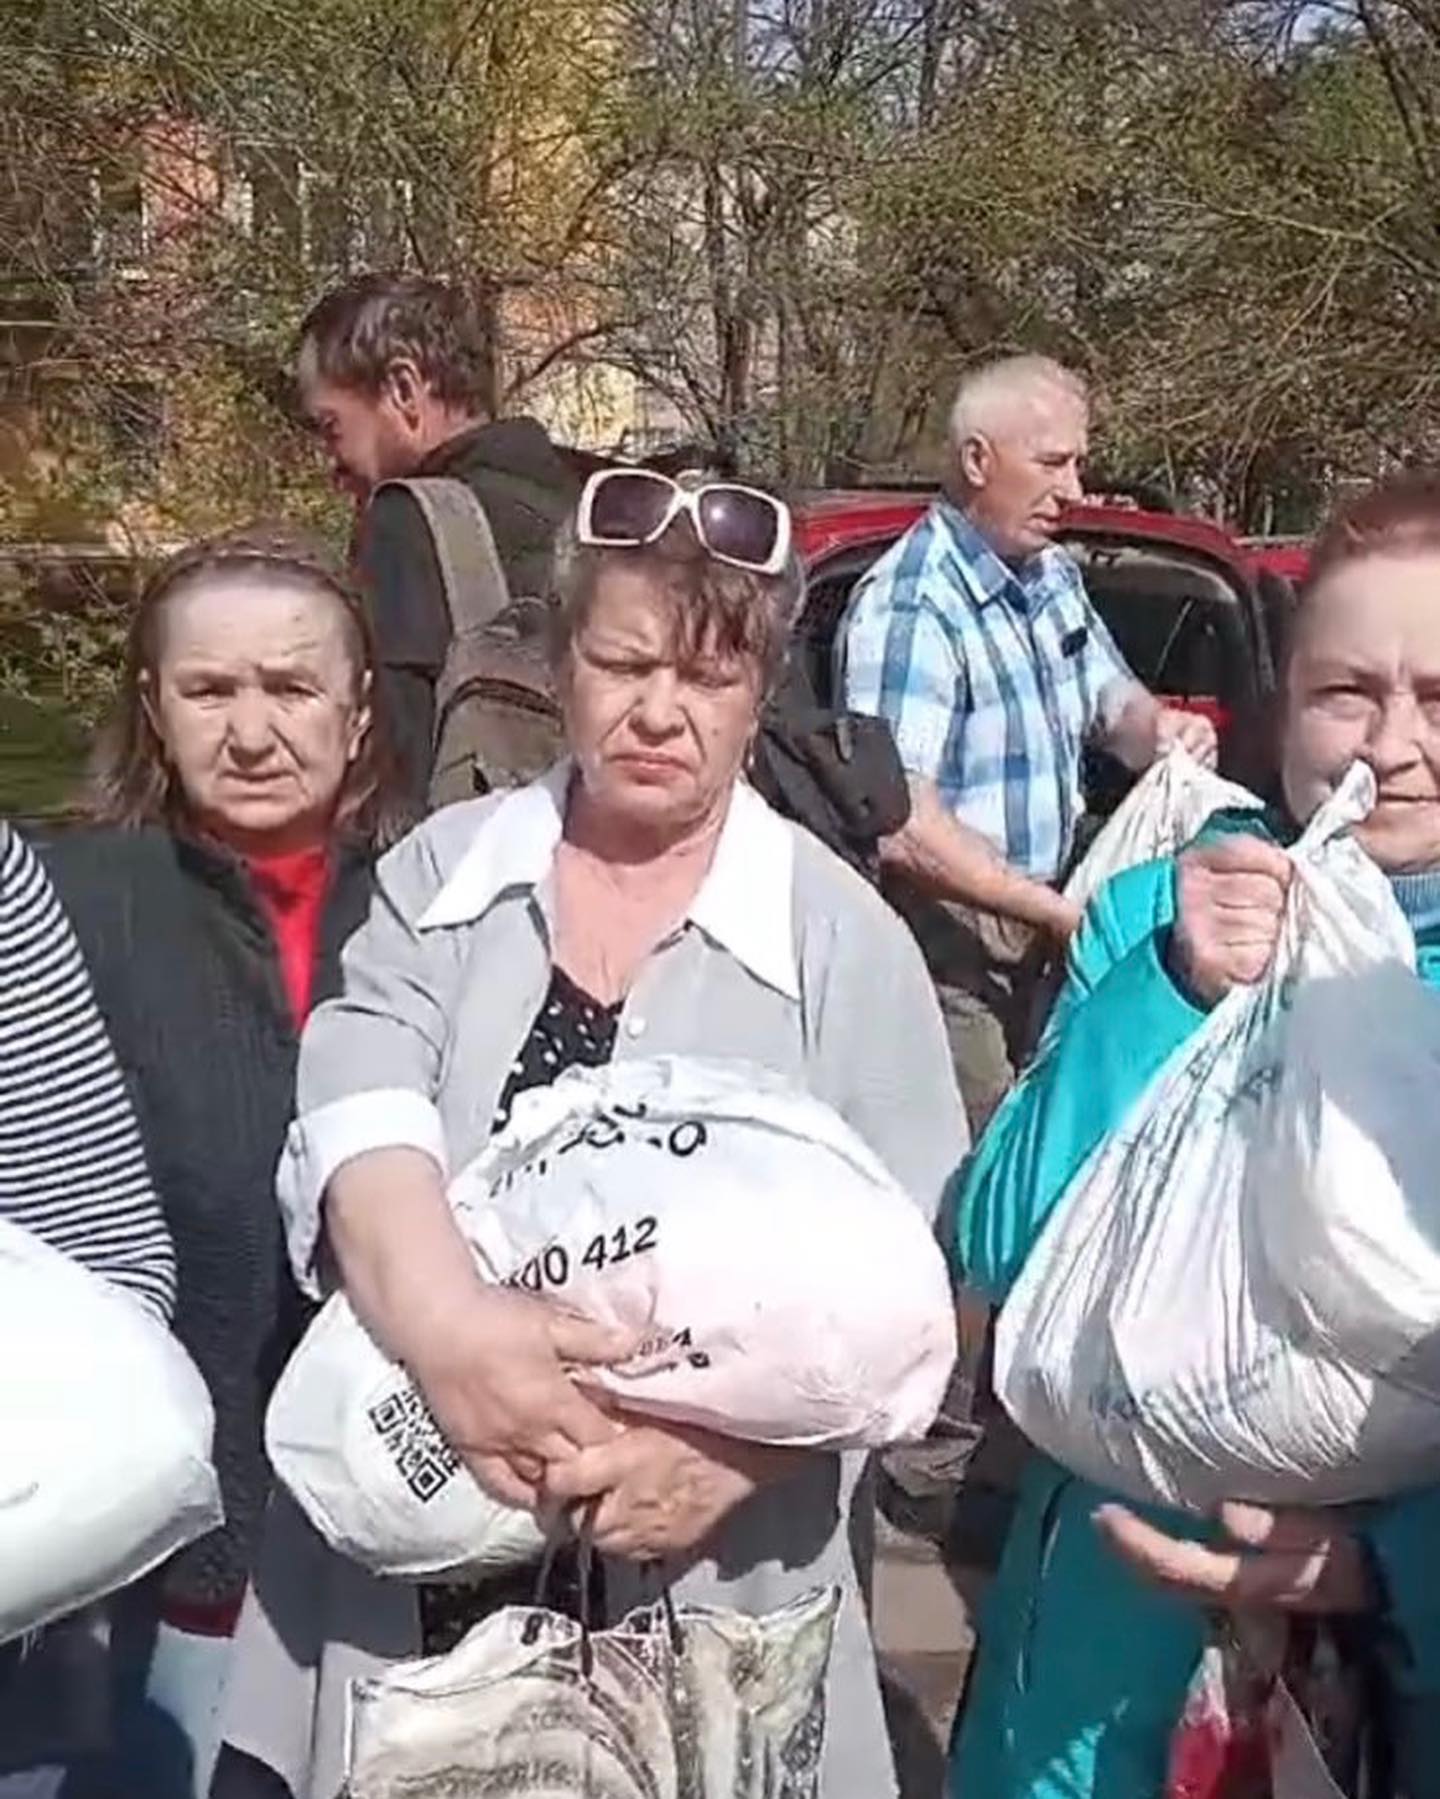 People holding bags and supplies, standing by a vehicle in a sunny outdoor setting, ready to volunteer help for Ukraine.